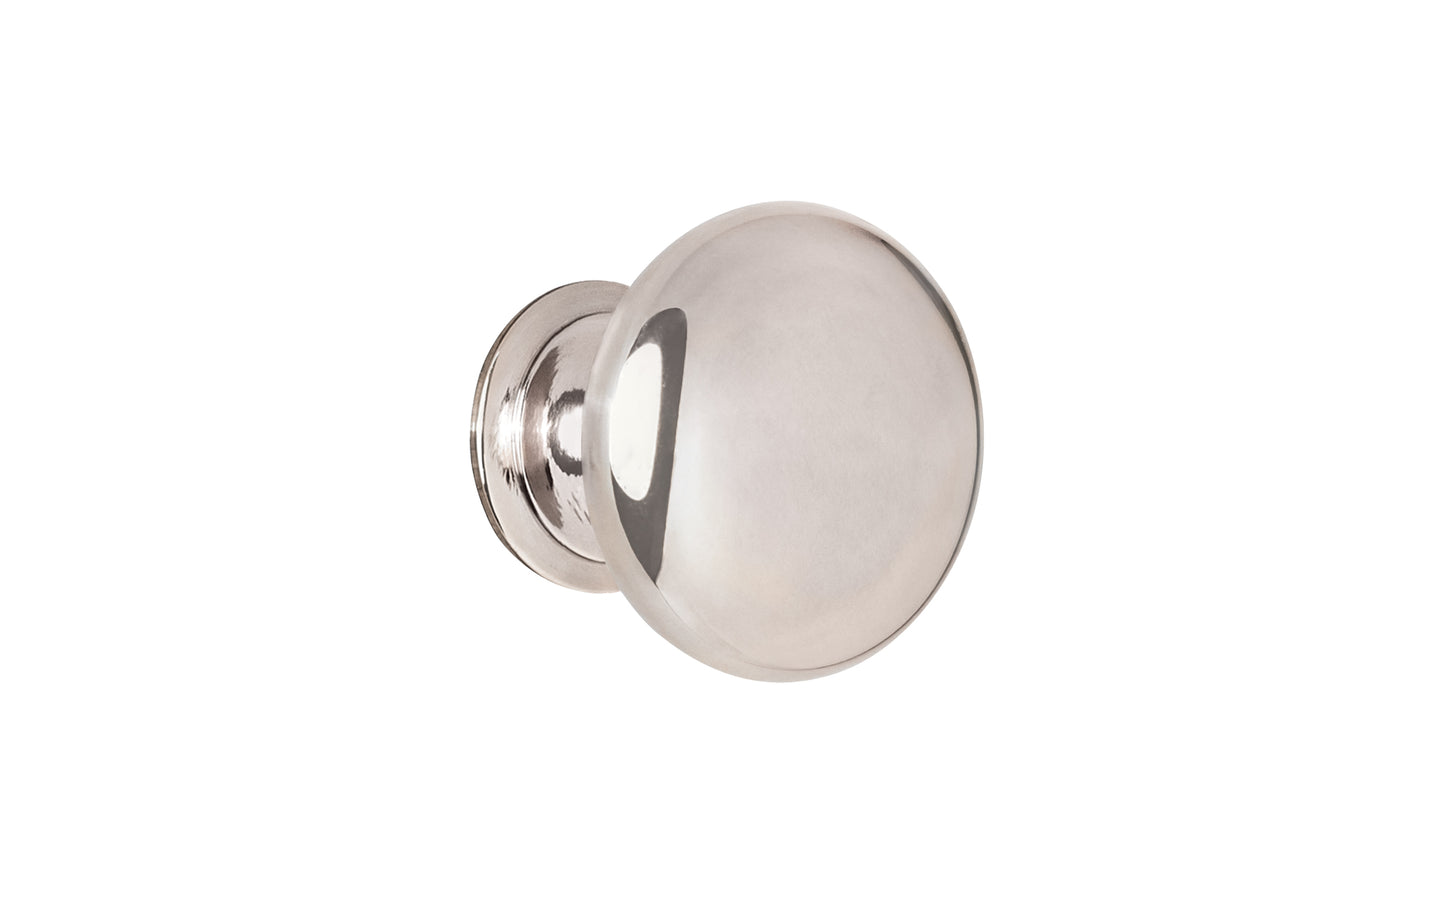 Vintage-style Hardware · Traditional & Classic Brass Knob with a Polished Nickel Finish. 1" diameter size knob. Made of high quality brass, this stylish round cabinet knob has a smooth look & feel on a pedestal shaped base. Works great in kitchens, bathrooms, on furniture, cabinets, drawers. Authentic reproduction hardware.